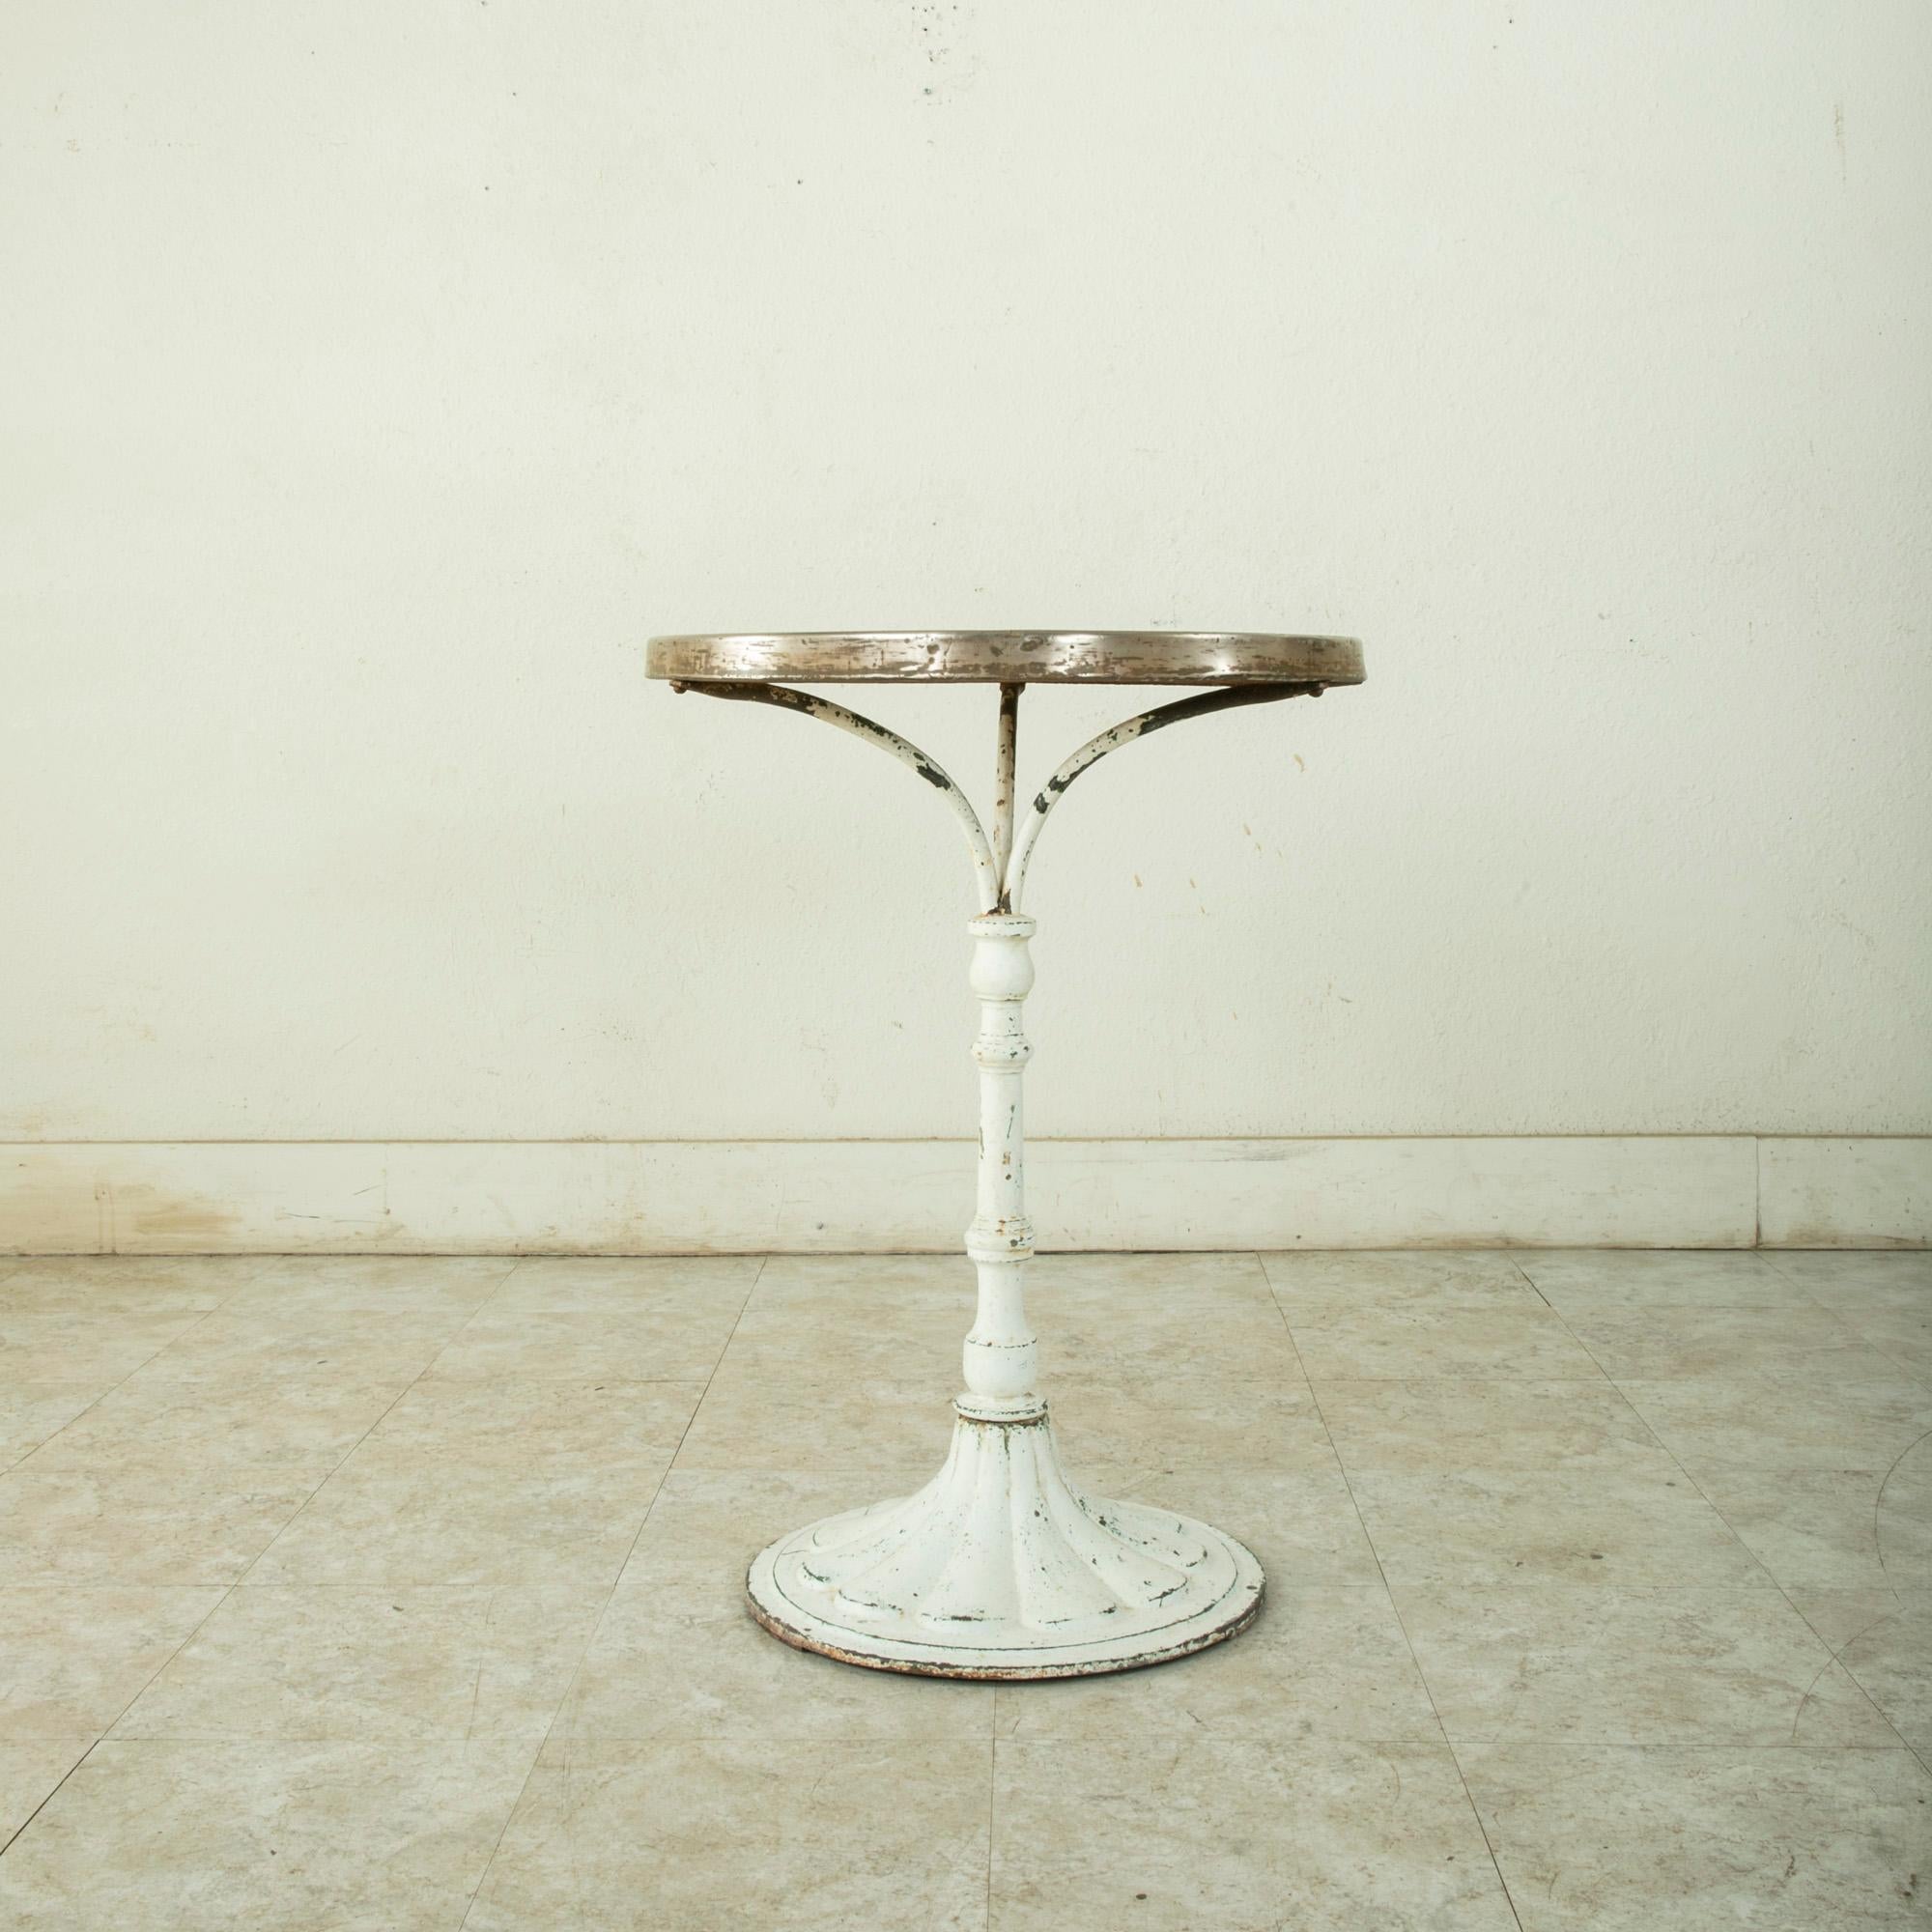 This French round bistro table from the turn of the twentieth century features an iron pedestal base and a white marble top. The marble is trimmed in brass and joins the base with three arm supports. The base is painted white with a patina that